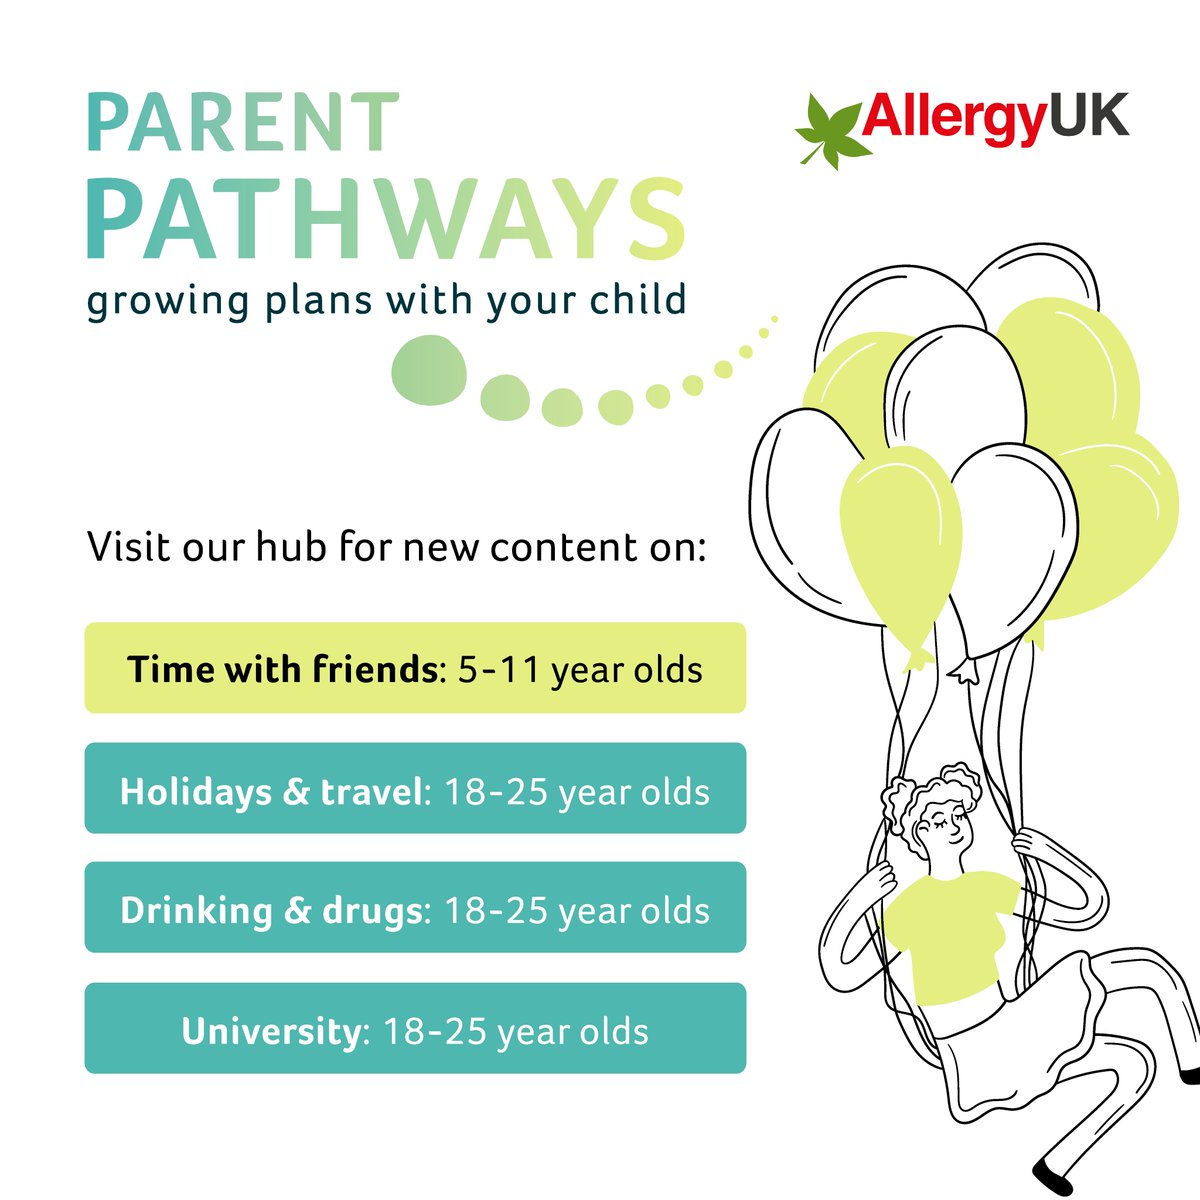 Are you caring for a young person living with allergy? We’ve launched some new FREE resources on our Parent Pathways hub, to provide support in navigating the path to independence while managing their allergies. Explore what we have added this month👇 bit.ly/3nspVom